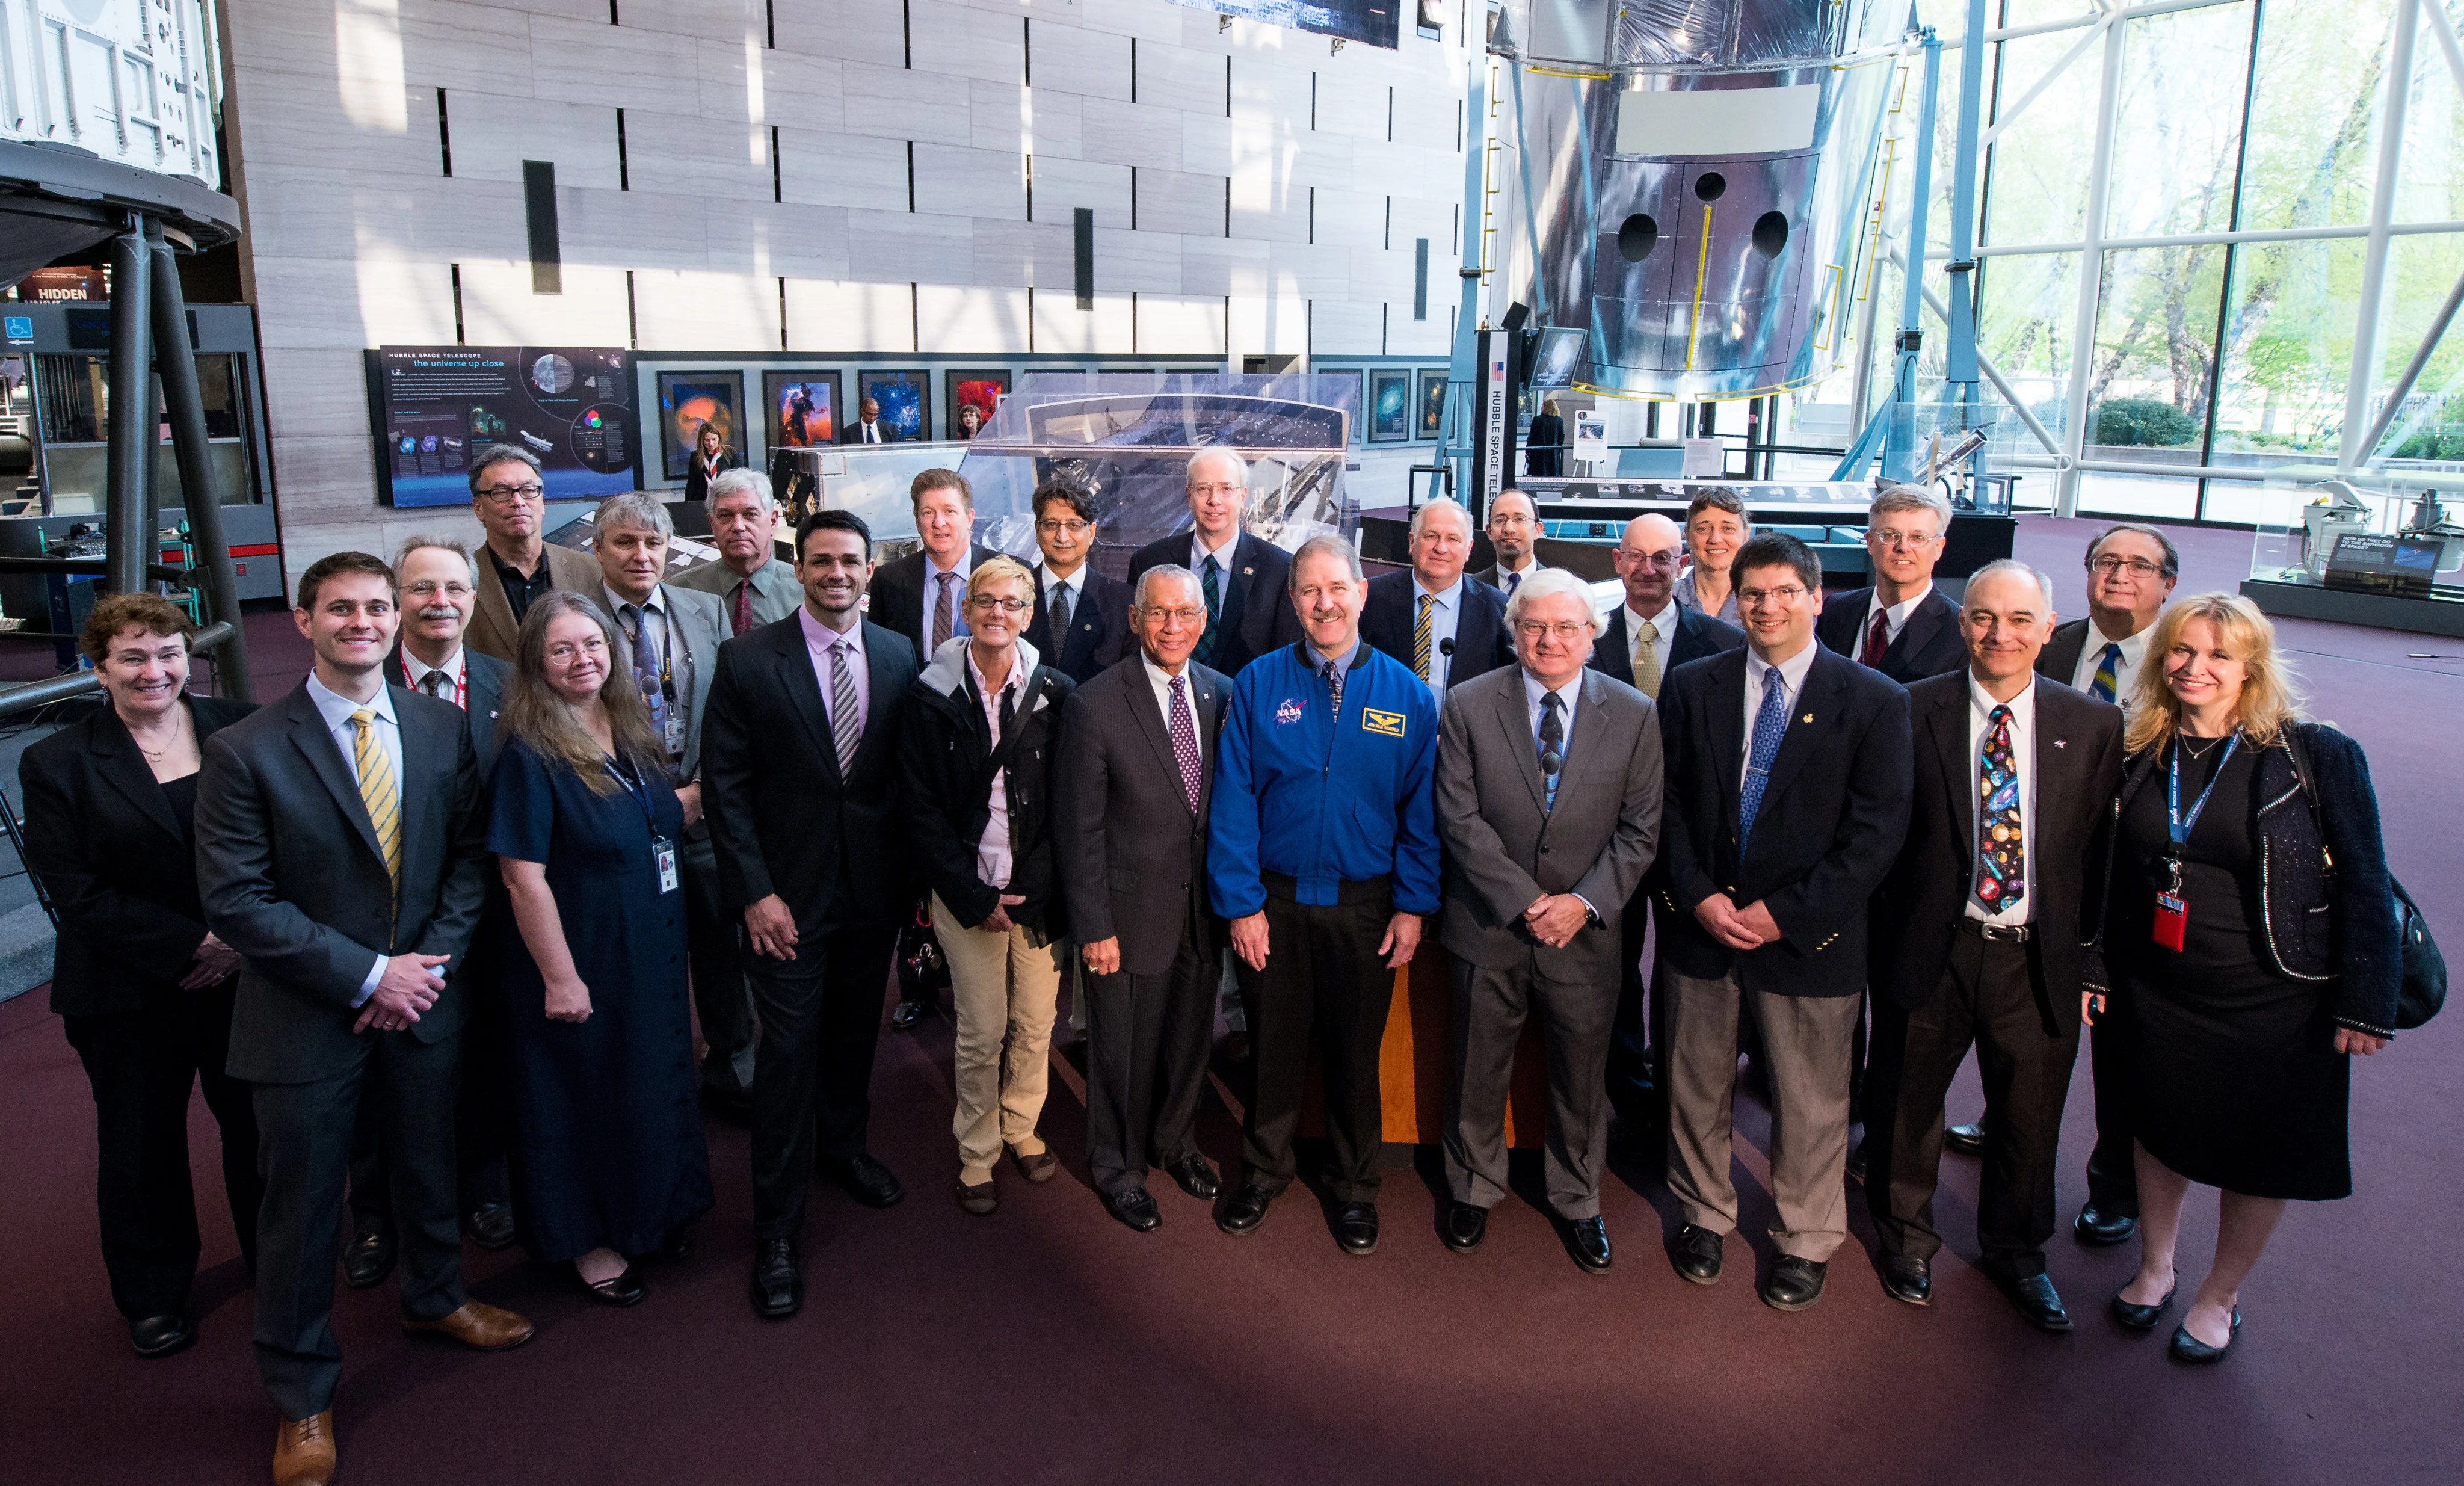 A group of 24 people gathered in front of the "Repairing Hubble" exhibit at the Smithsonian National Air and Space Museum in Washington, D.C.